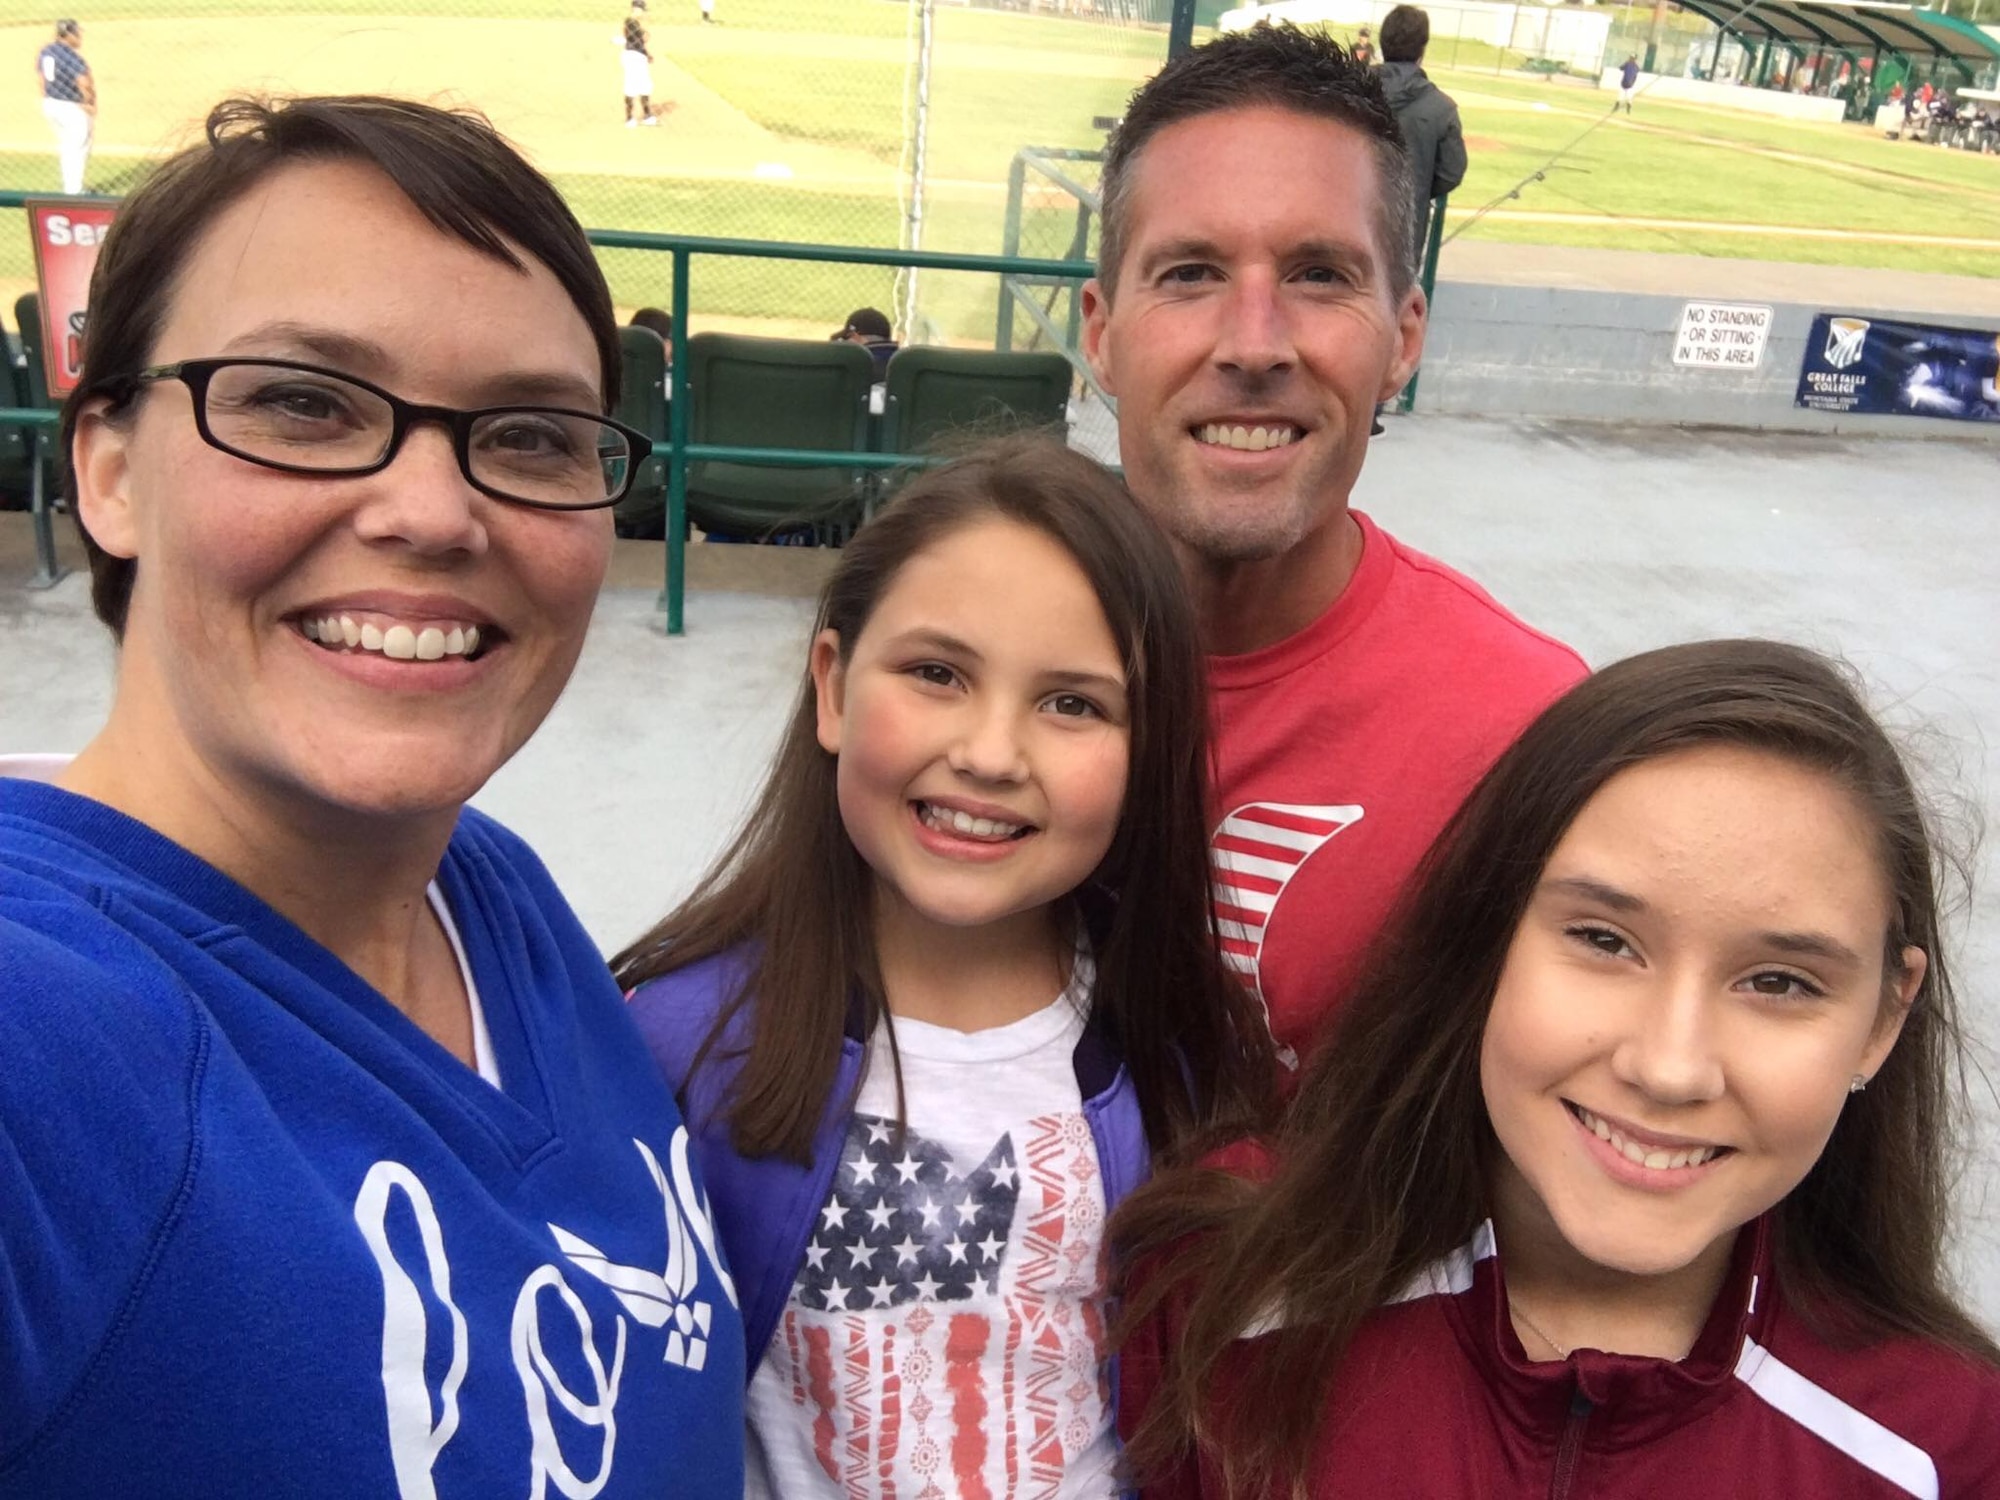 Chief Master Sgt. Amber Mitchell, 341st Missile Wing command chief, her daughters Marin, left, and Taylor, and her husband Brian, take a photo during a baseball game June 22, 2017, at Great Falls, Mont. Mitchell has taken the reigns as the new command chief here and is excited to bring her experiences, personality and goals to all of Team Malmstrom. (Courtesy photo)